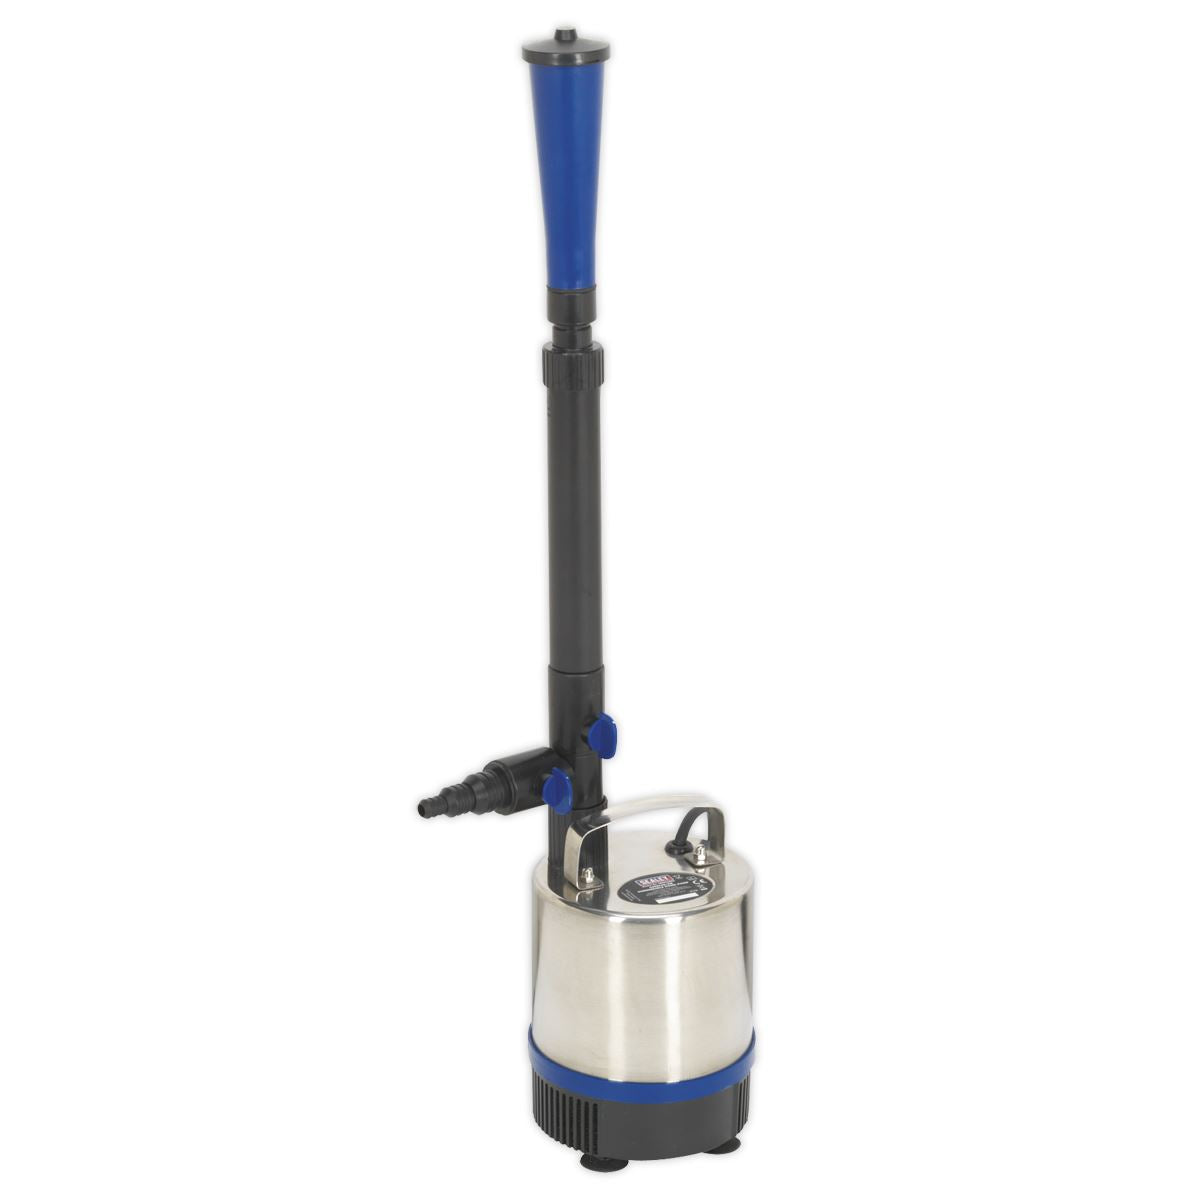 Sealey Submersible Pond Pump Stainless Steel 3600L/hr 230V